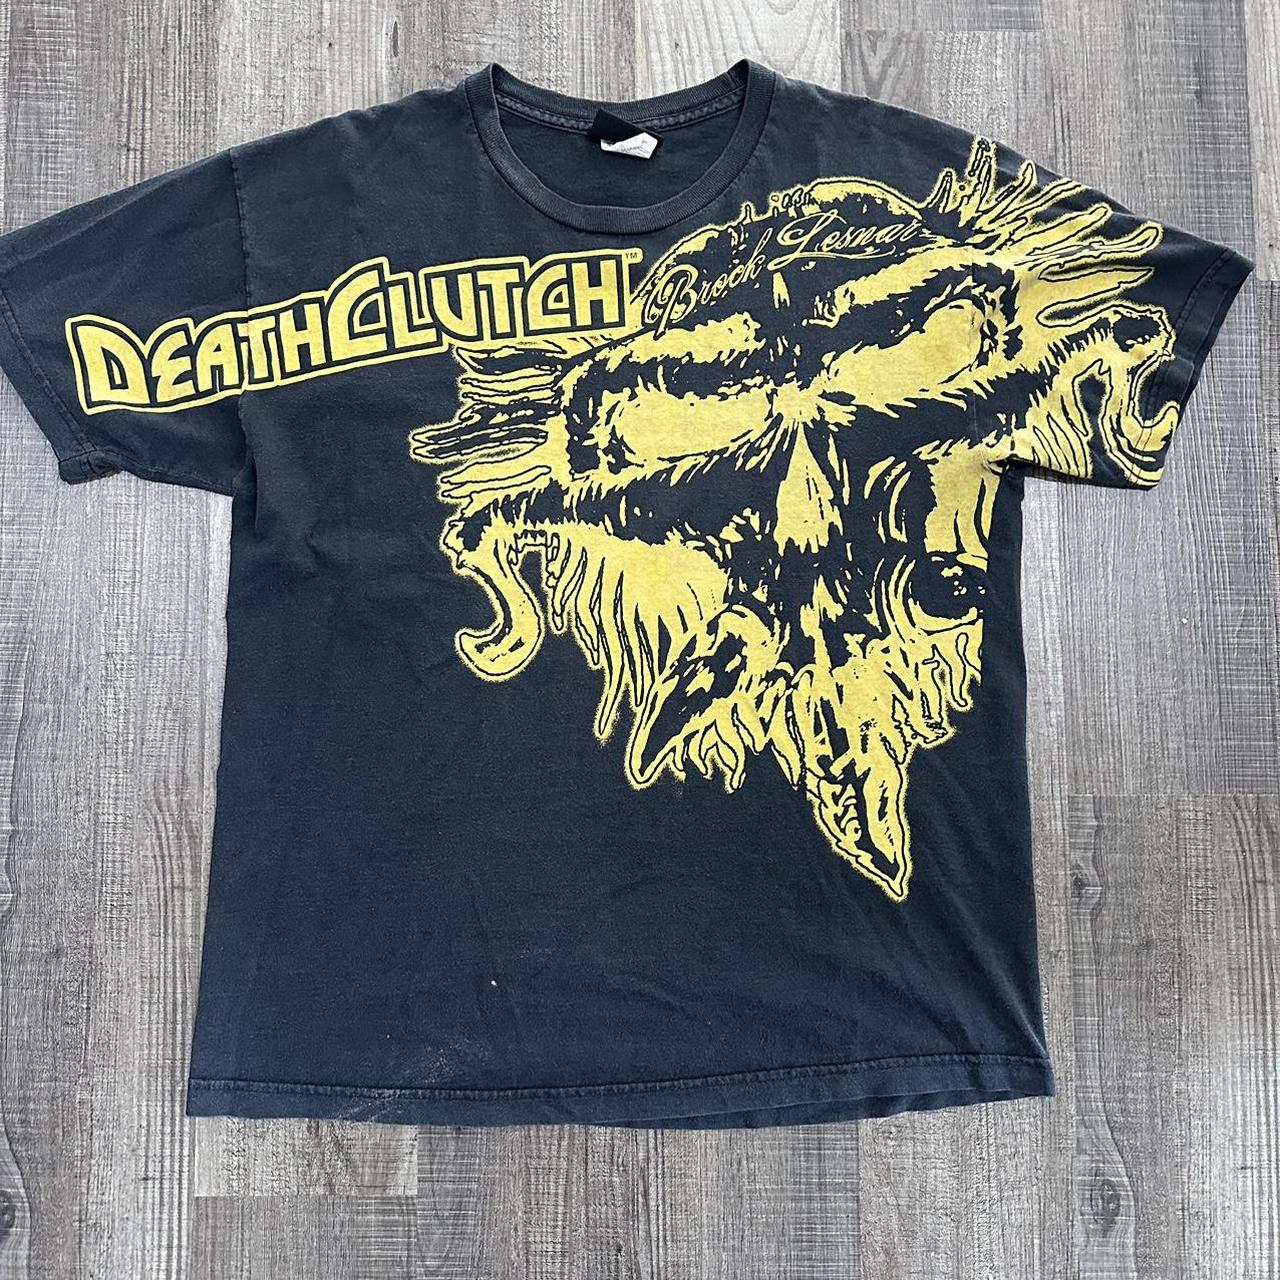 Affliction Men's Black and Yellow T-shirt